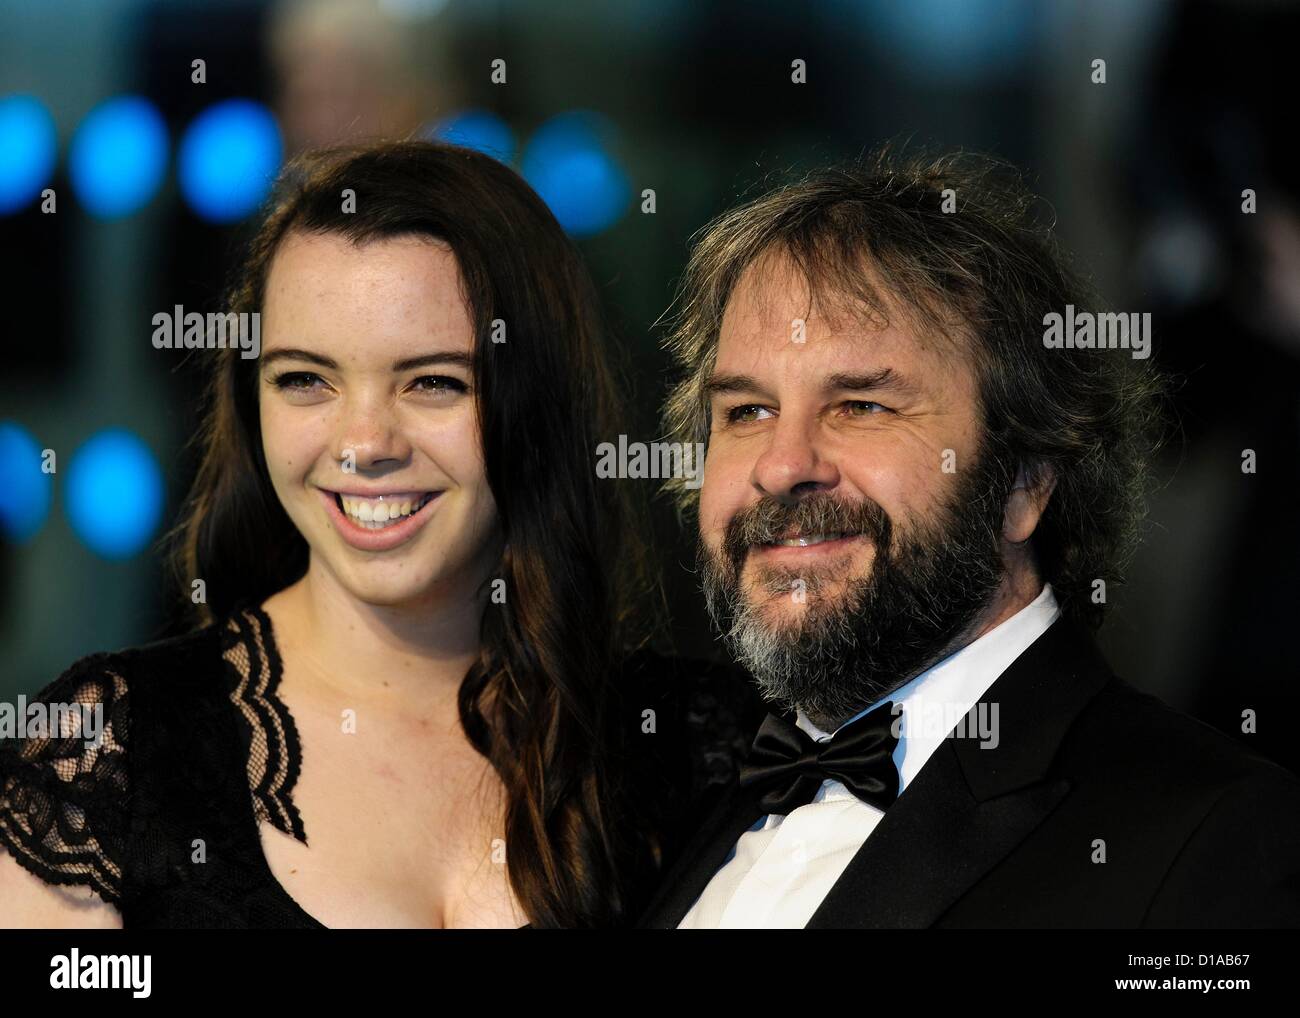 Director Sir Peter Jackson attends the 65th Royal Film Performance and UK premiere of THE HOBBIT: AN UNEXPECTED JOURNEY on 12/12/2012 at Leicester Square, London. Persons pictured: Katie Jackson and Peter Jackson. Picture by Julie Edwards Stock Photo